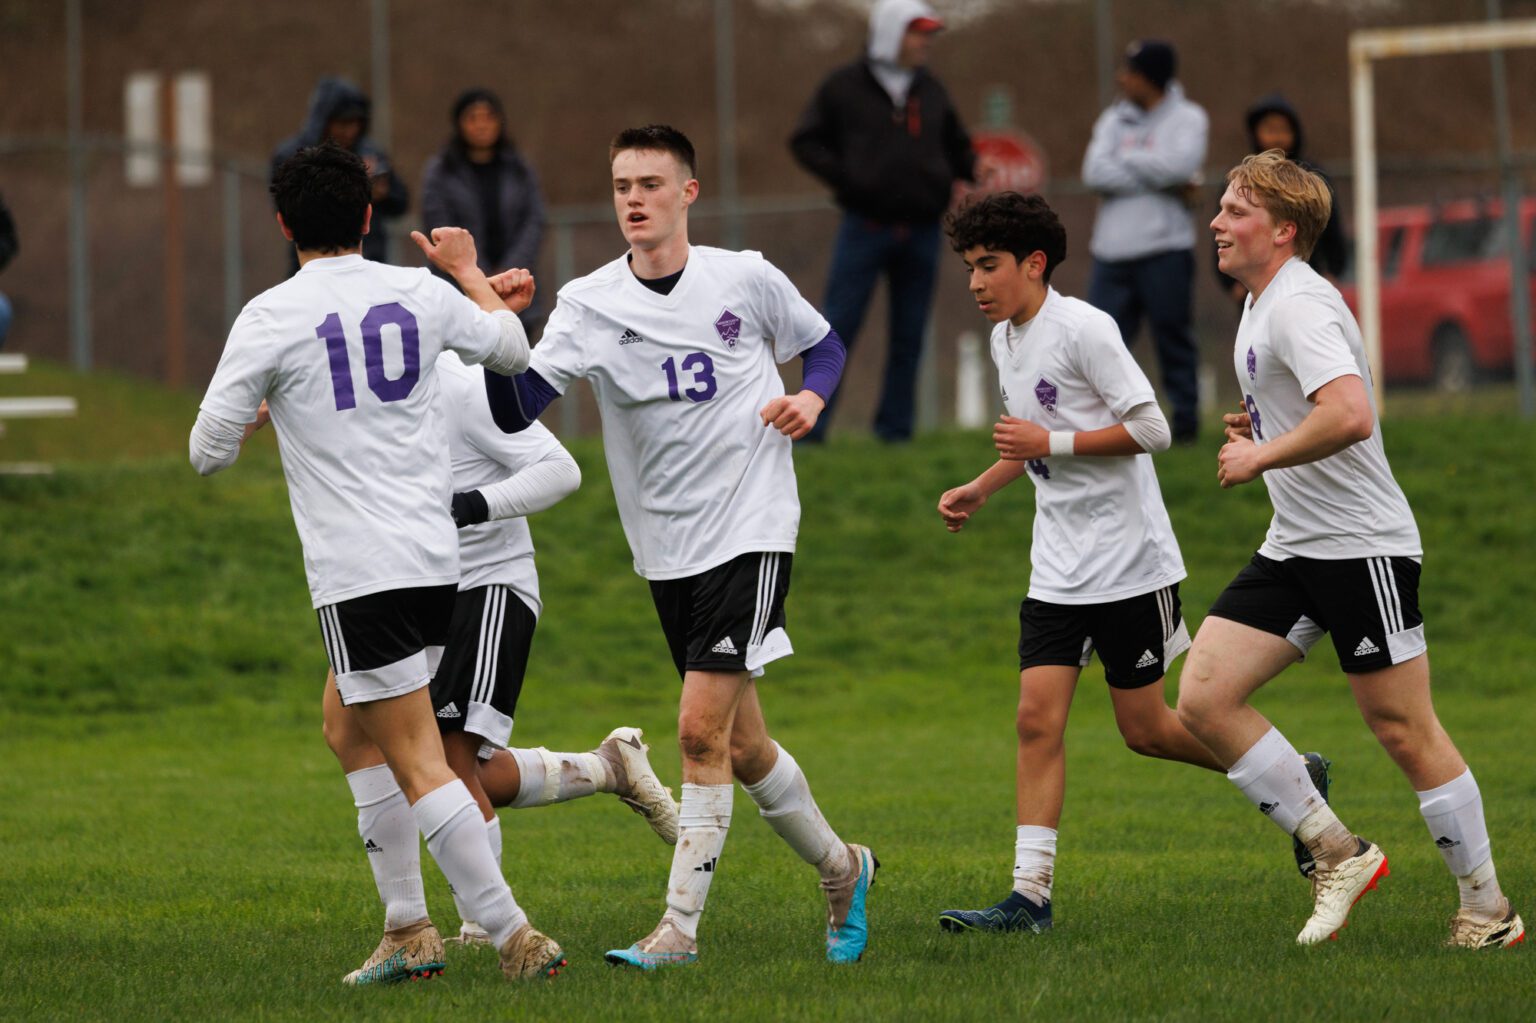 Nooksack Valley's Isaac Lind (13) gets a fist bump from teammate Evan Bravo on Monday, March 25 after scoring the first goal for the Pioneers in a 2-0 road win over Mount Baker.